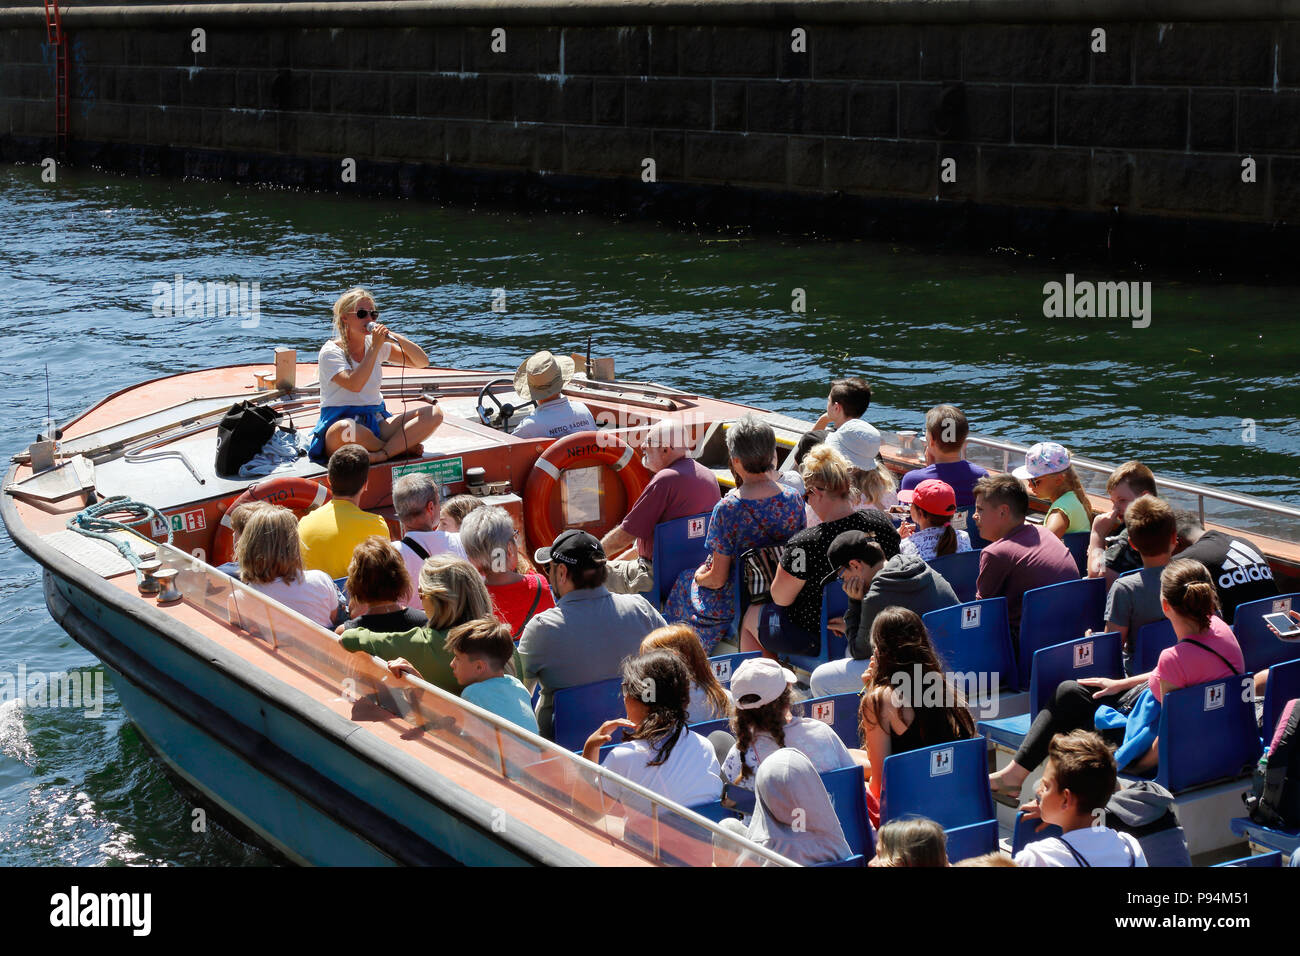 Copenhagen, Denmark - June 27, 2018: One open top canal tour boat with passengers on a guided sightseeing tour. Stock Photo